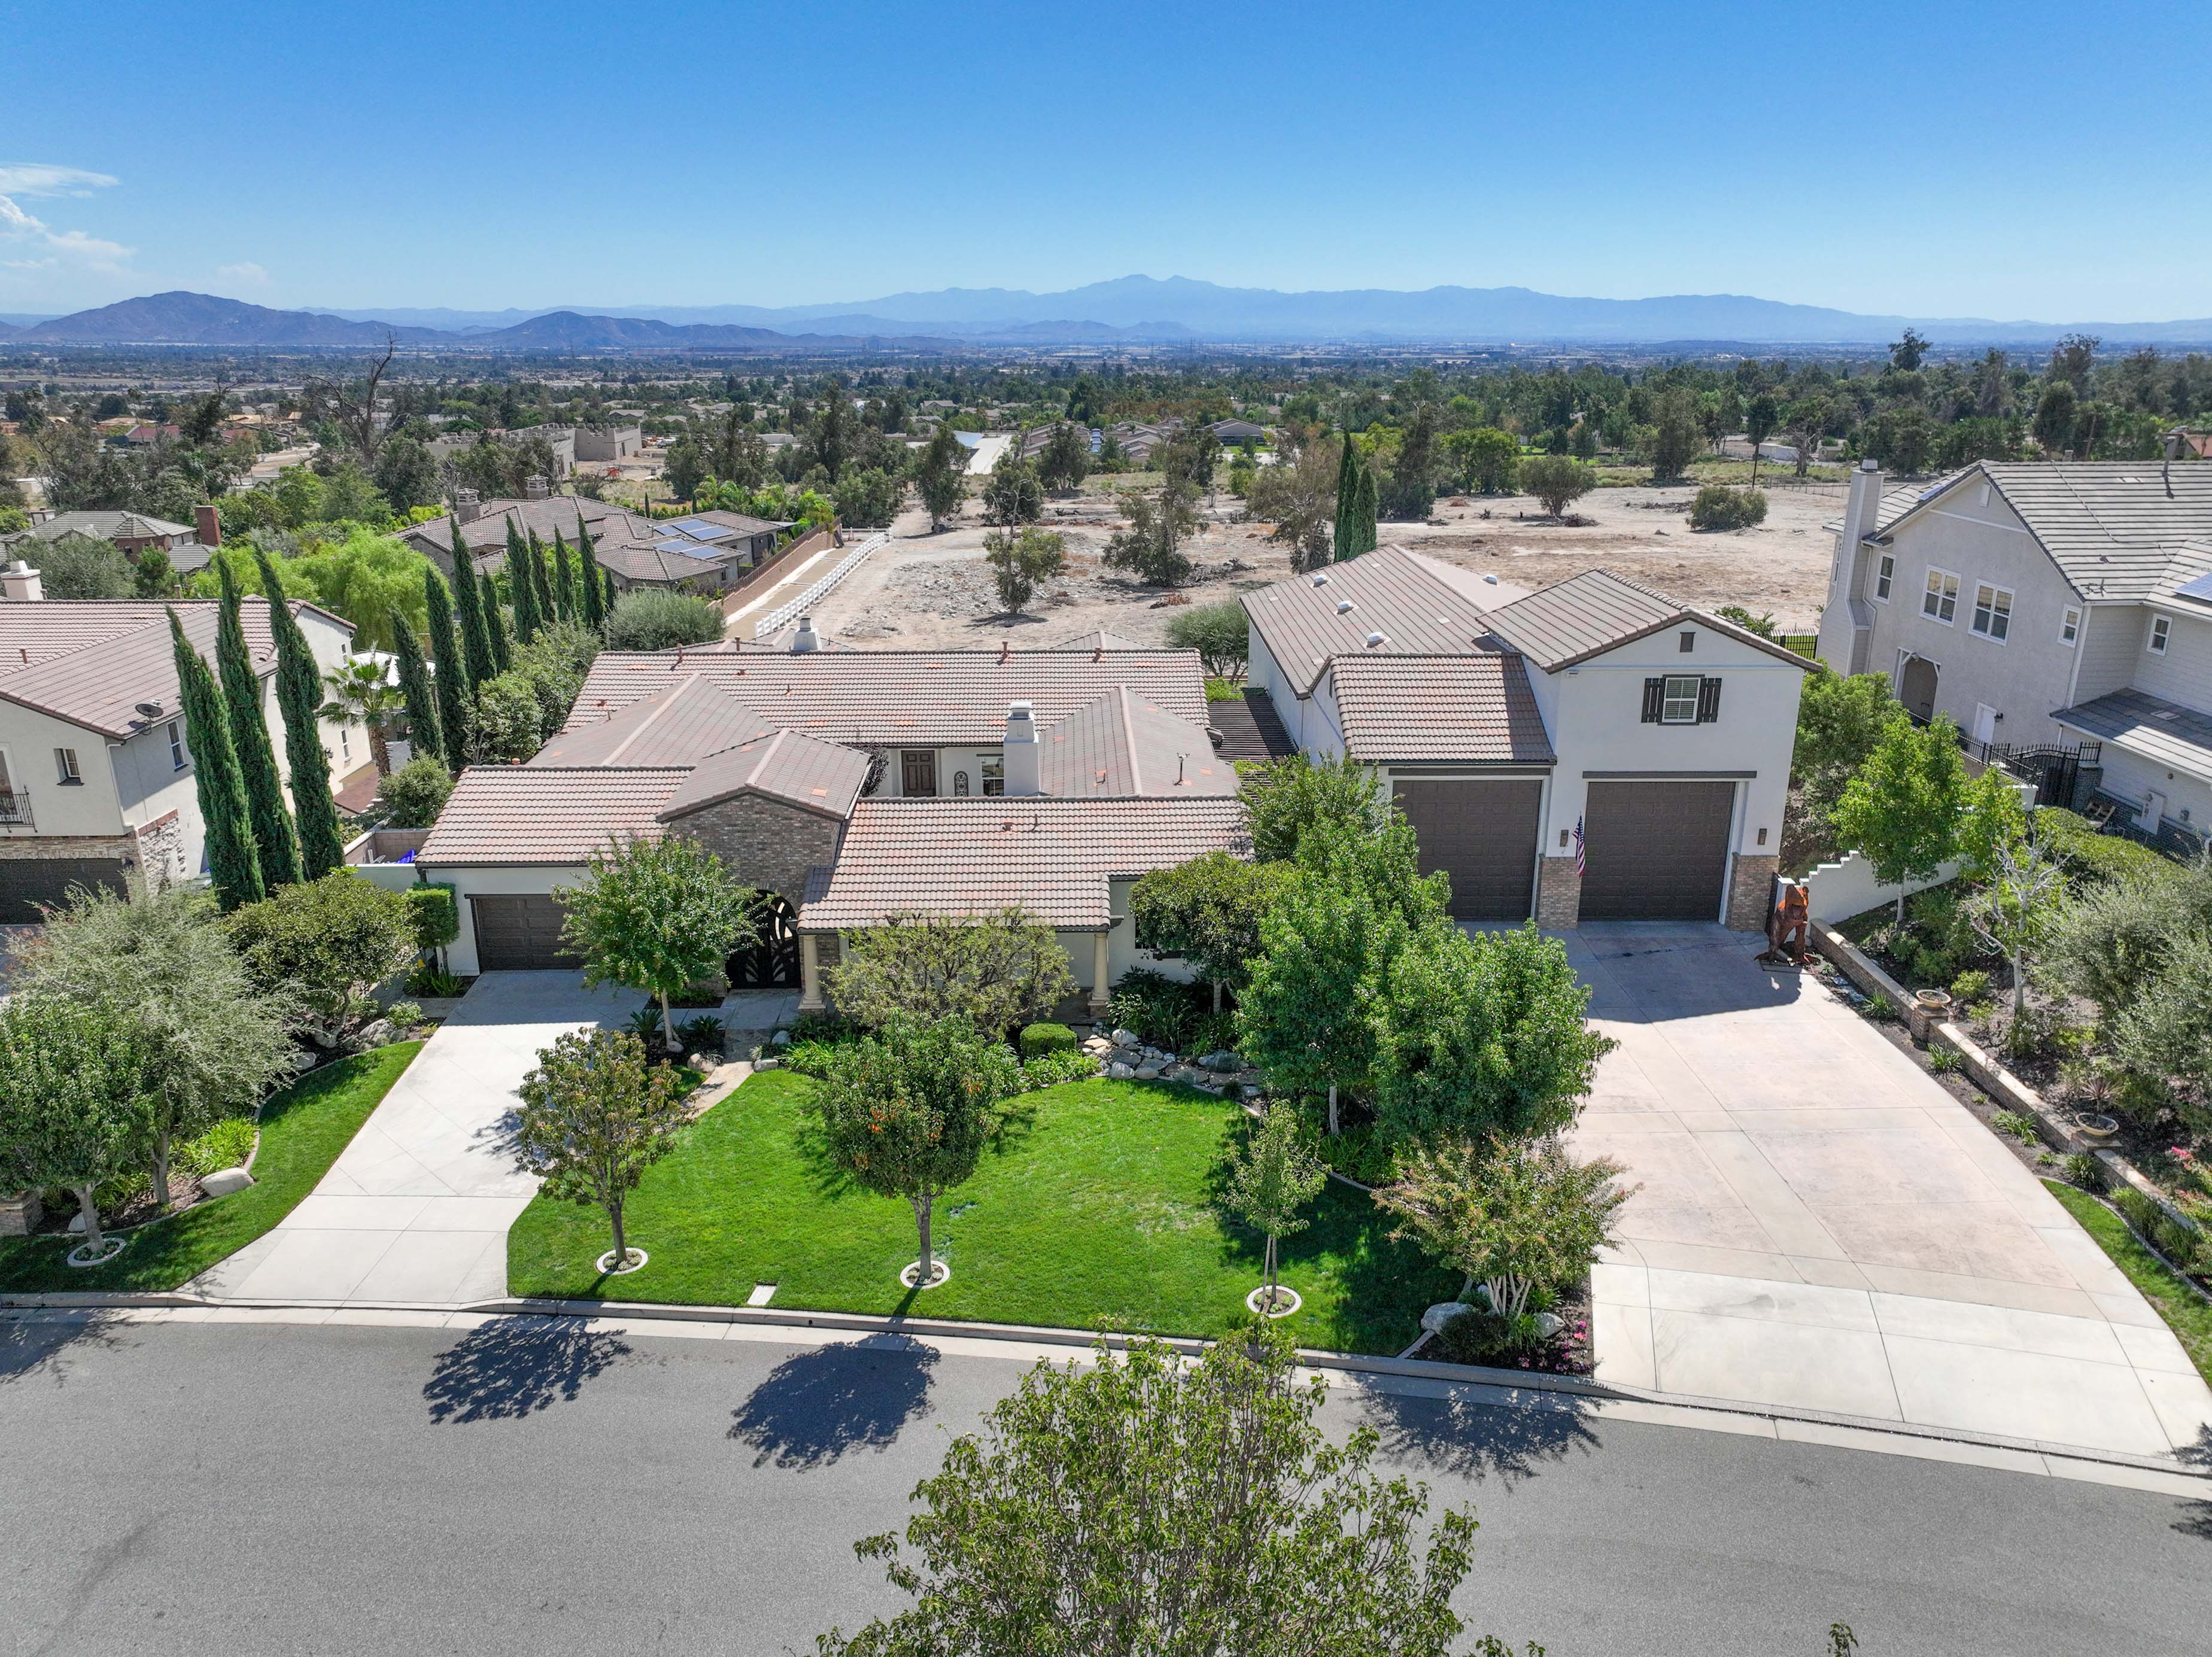 SOLD $1.55M: 13171 Harness Dr, Rancho Cucamonga, CA 91739